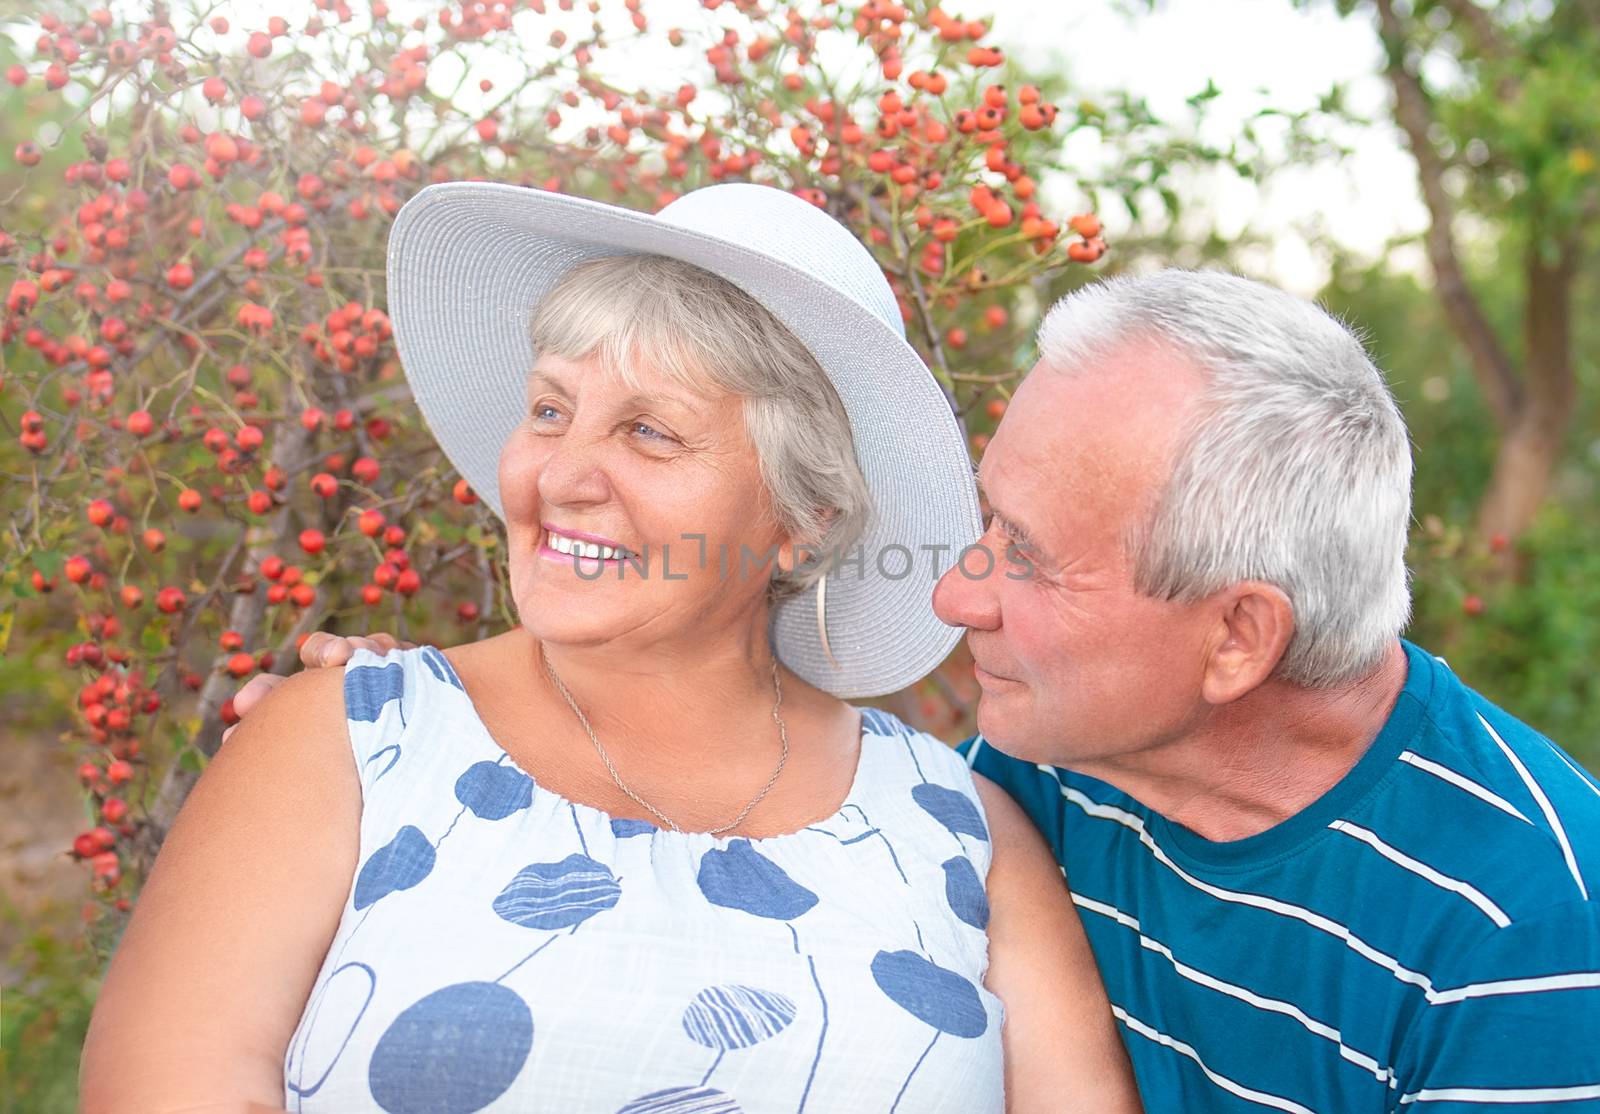 Authentic outdoor shot of aging couple having fun in the garden and blessed with love. During their game man is trying to kiss his partner and she is laughing out loud. Love and family concept.